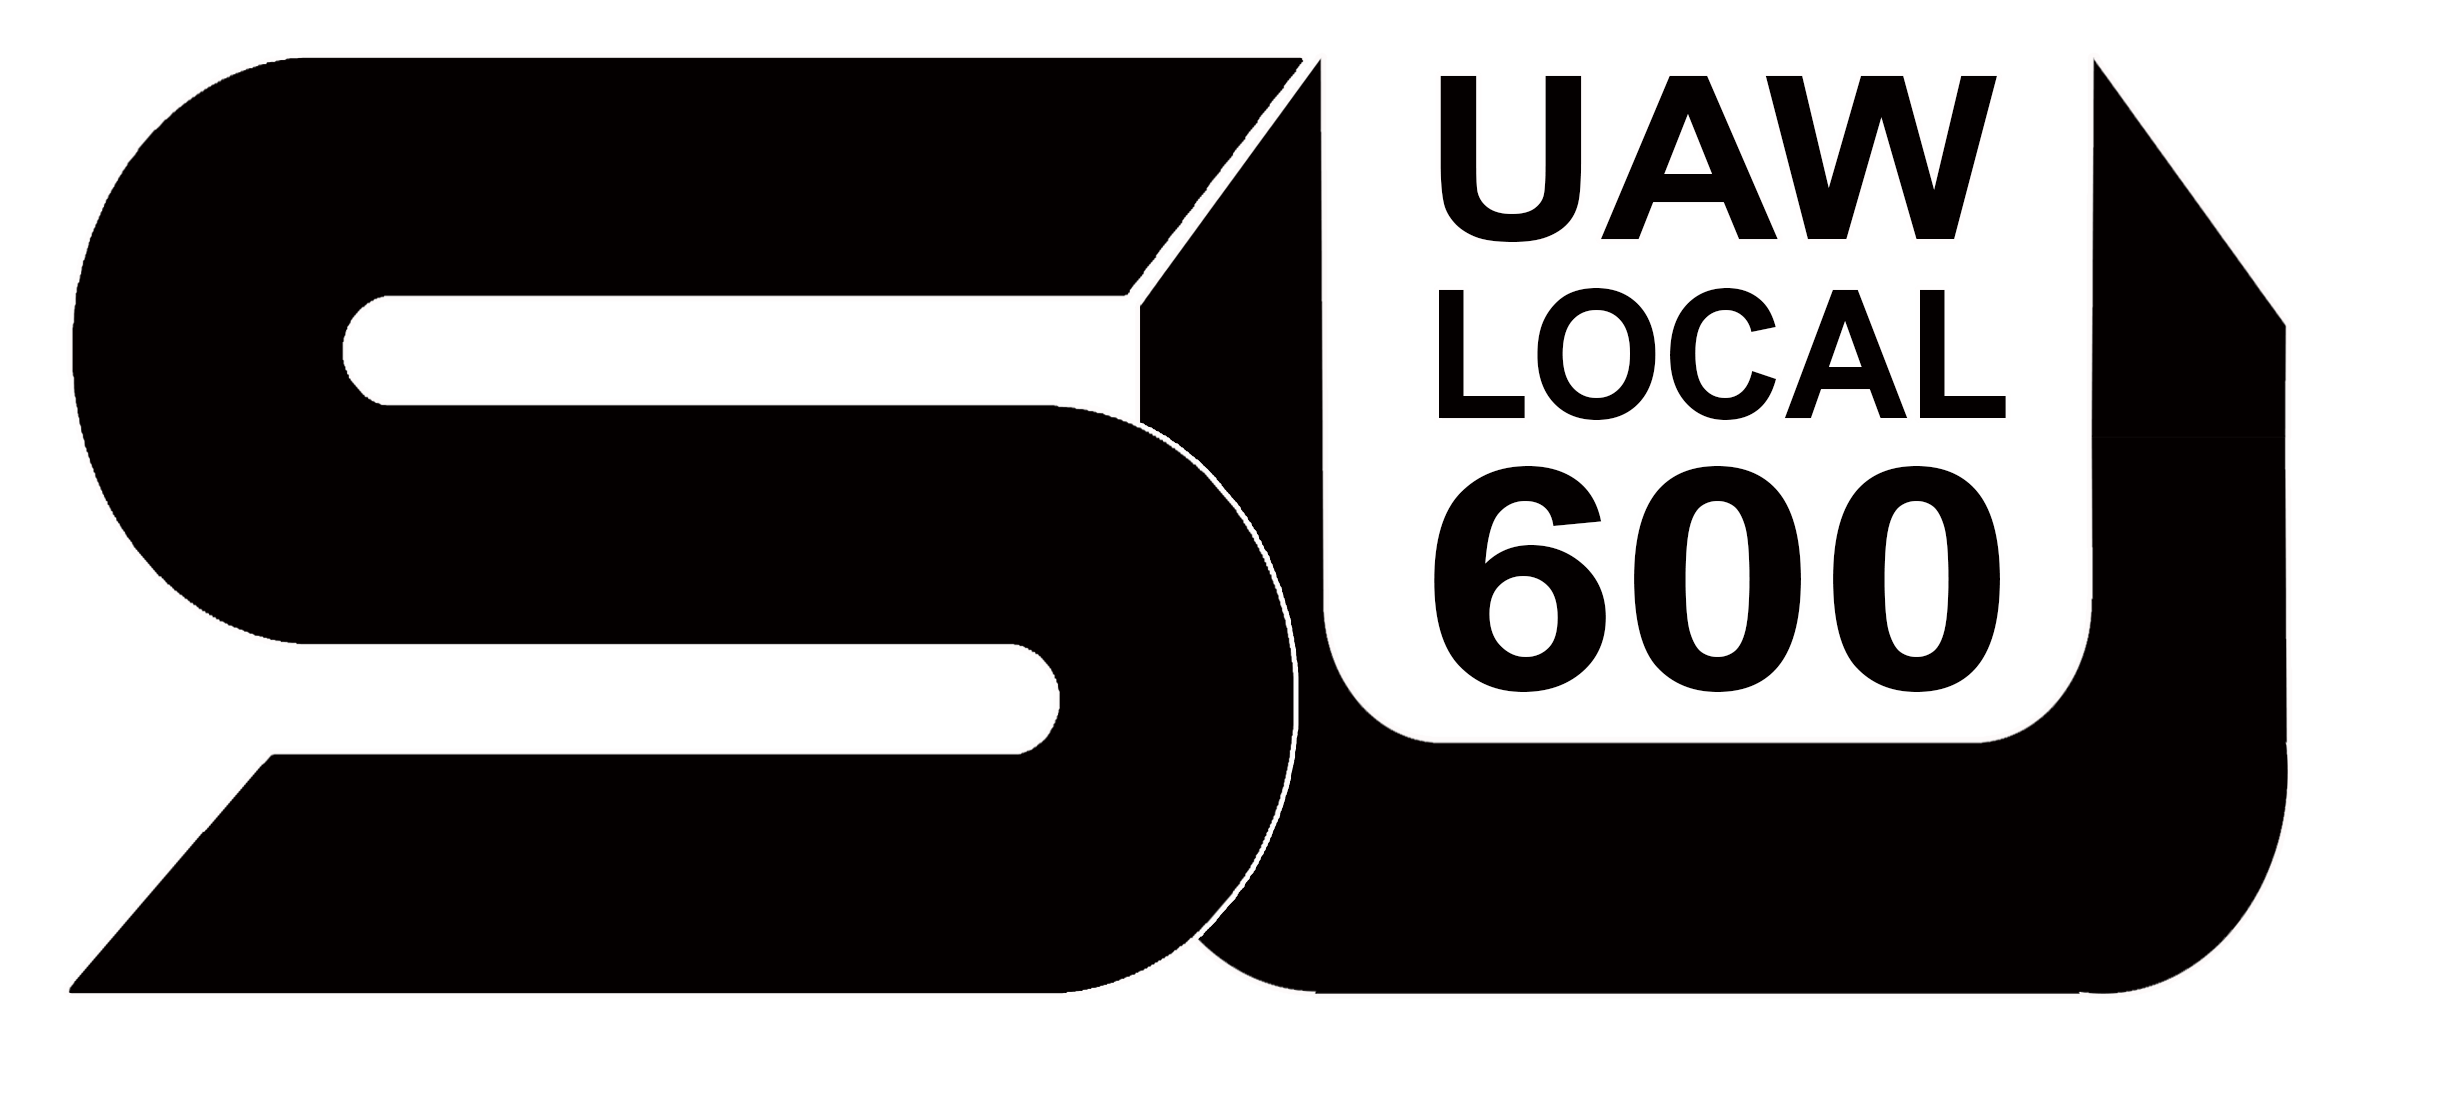 Local 600 UAW Logo - Member's Resources – Local 600 Steel Unit